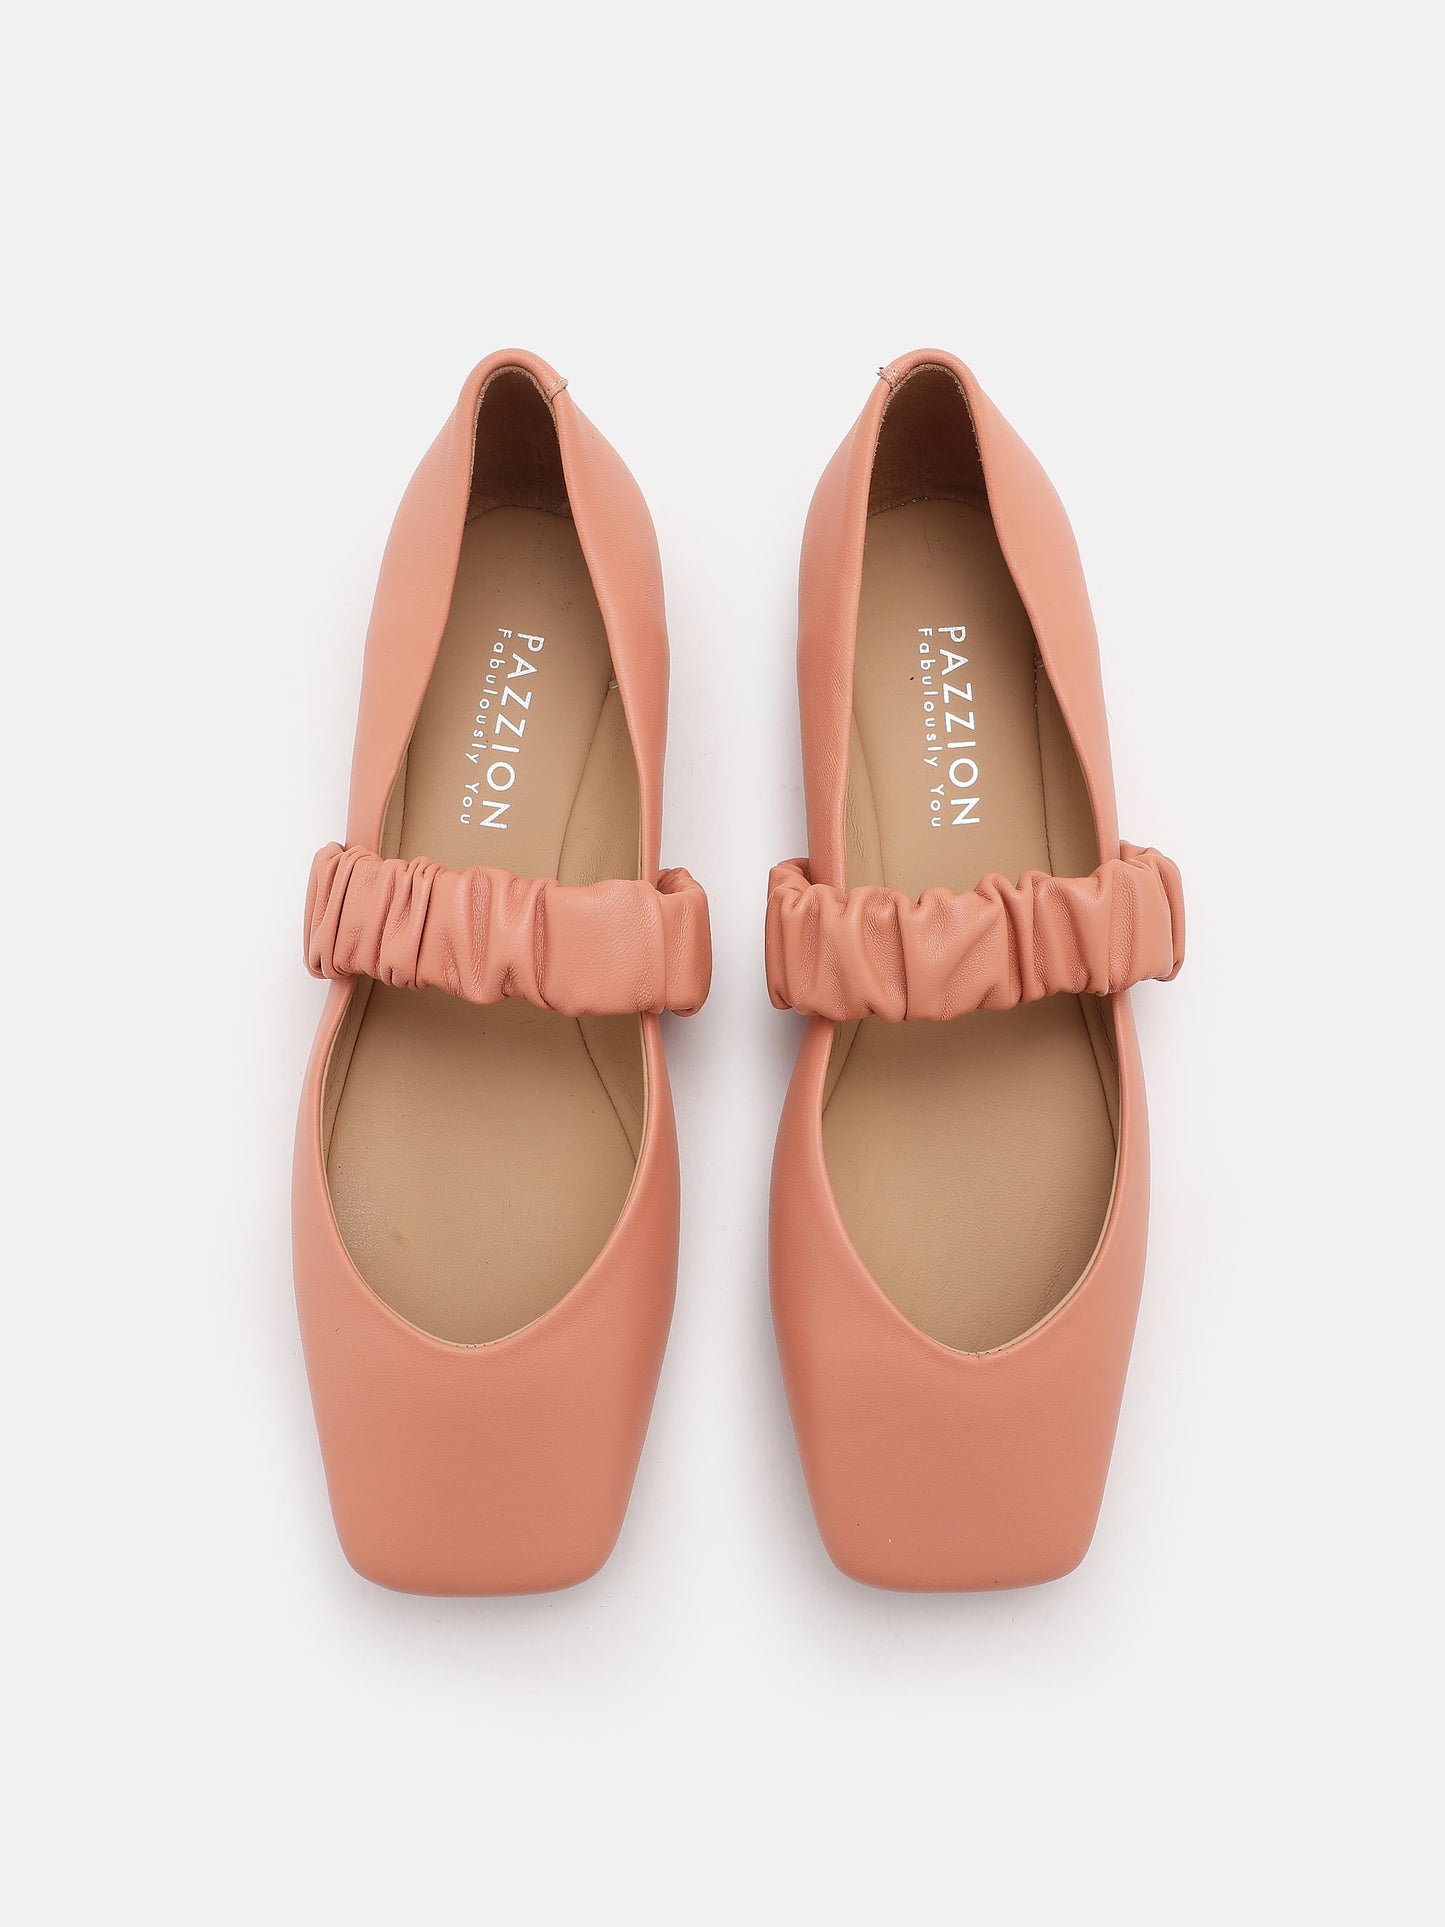 PAZZION, Zion Ruched Leather Band Ballet Flats, Pink